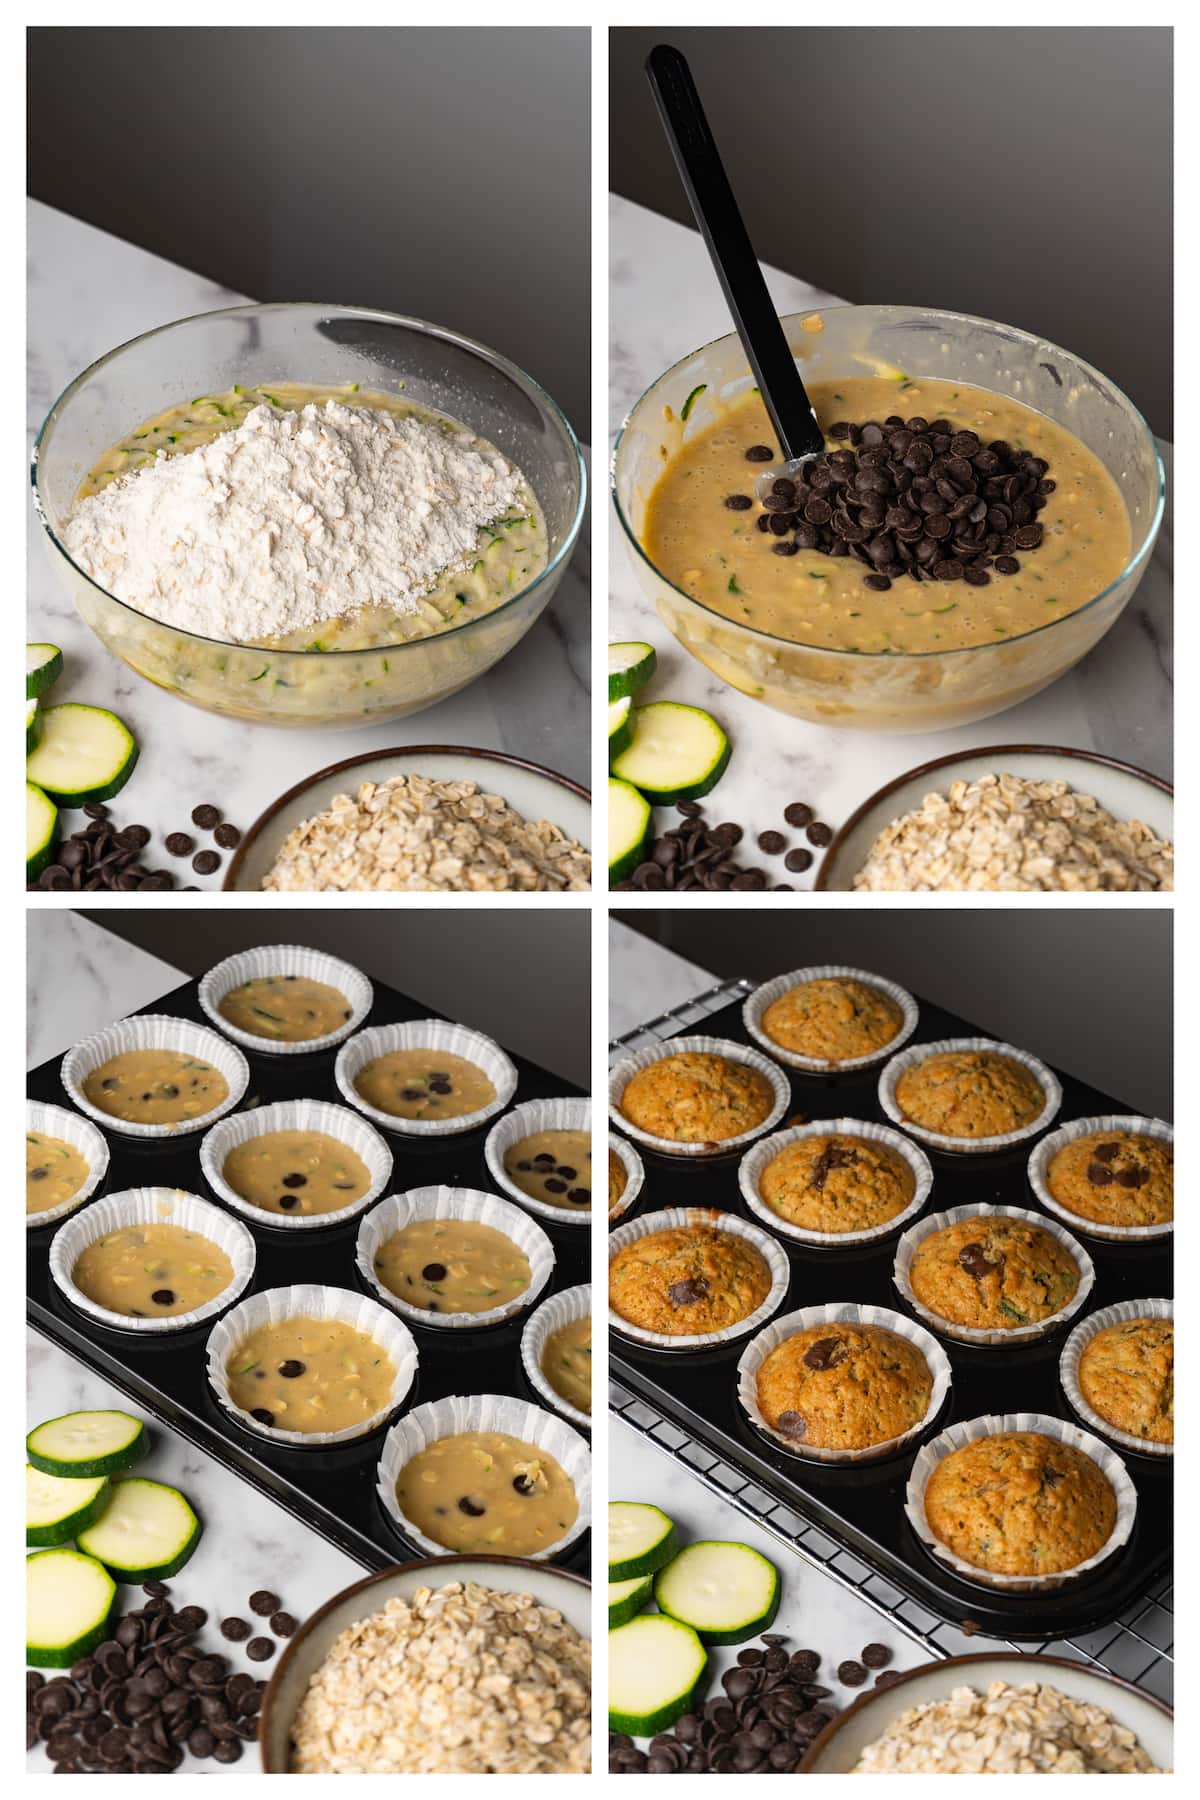 The collage image shows four steps to make batter for zucchini muffins with chocolate chips and to bake 12 miffins.